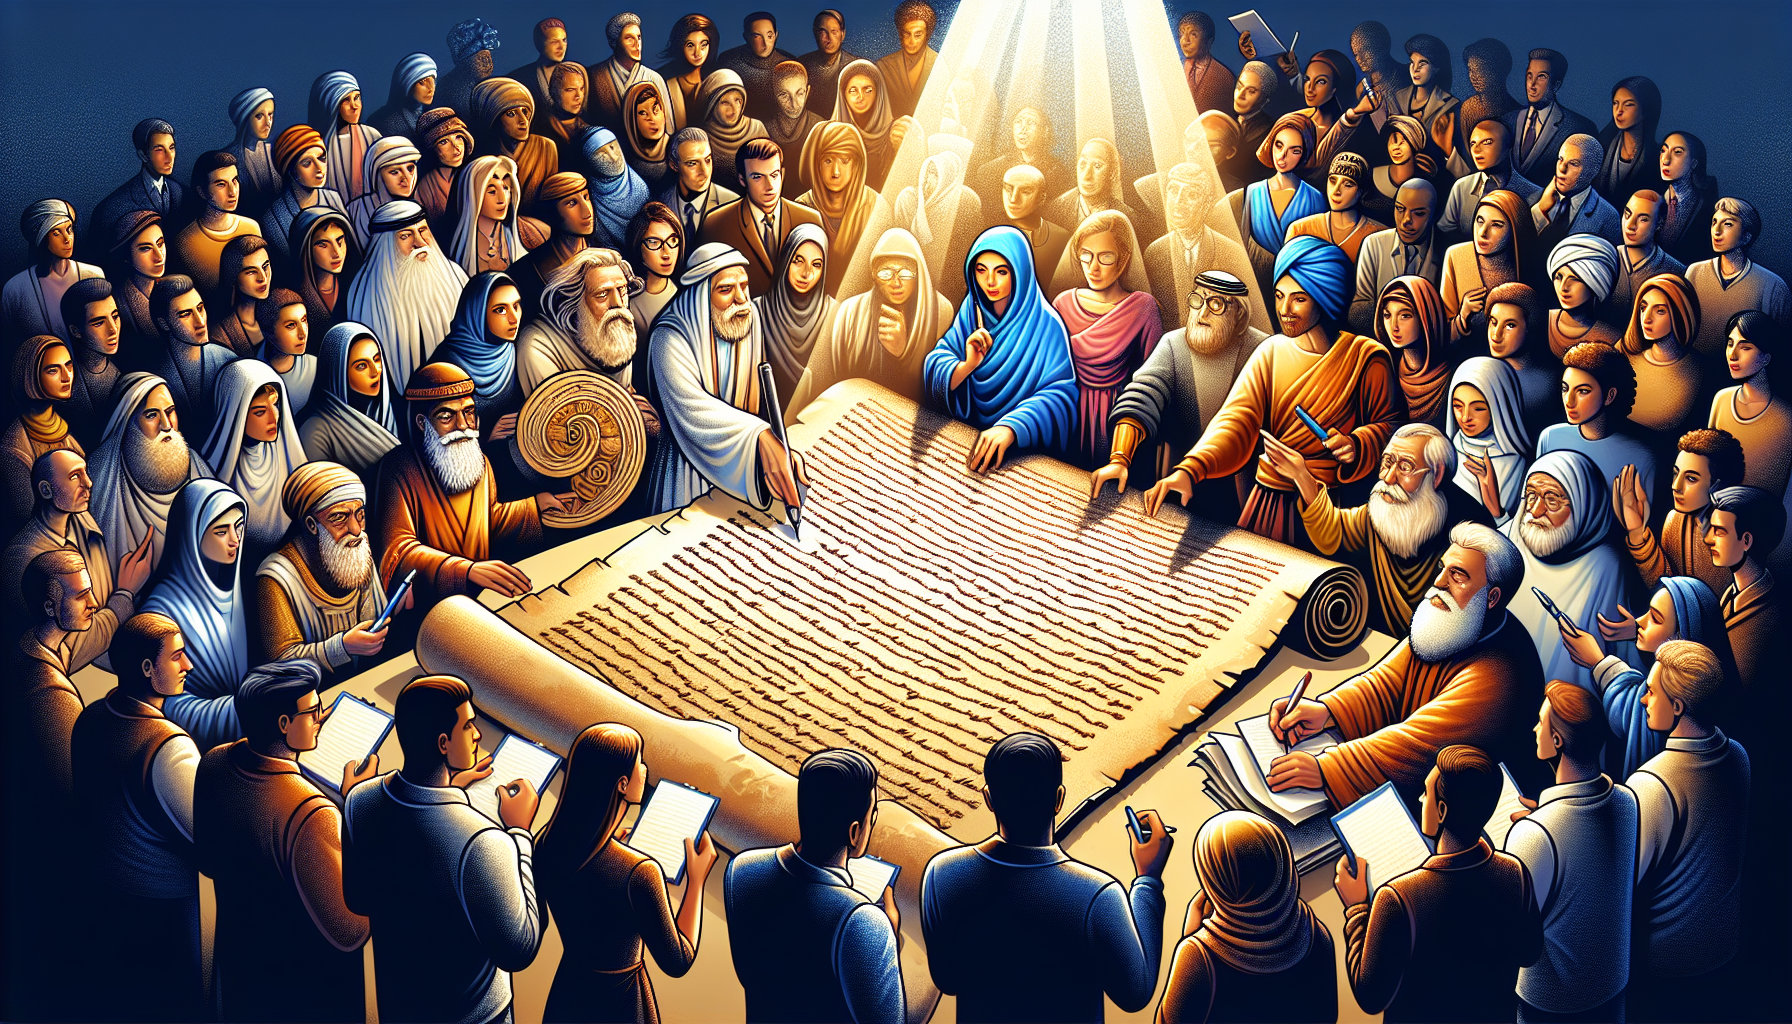 A vibrant digital artwork displaying an array of people from different historical eras and various backgrounds gathered around a large, ancient manuscript under a spotlight, each one holding a pen, re